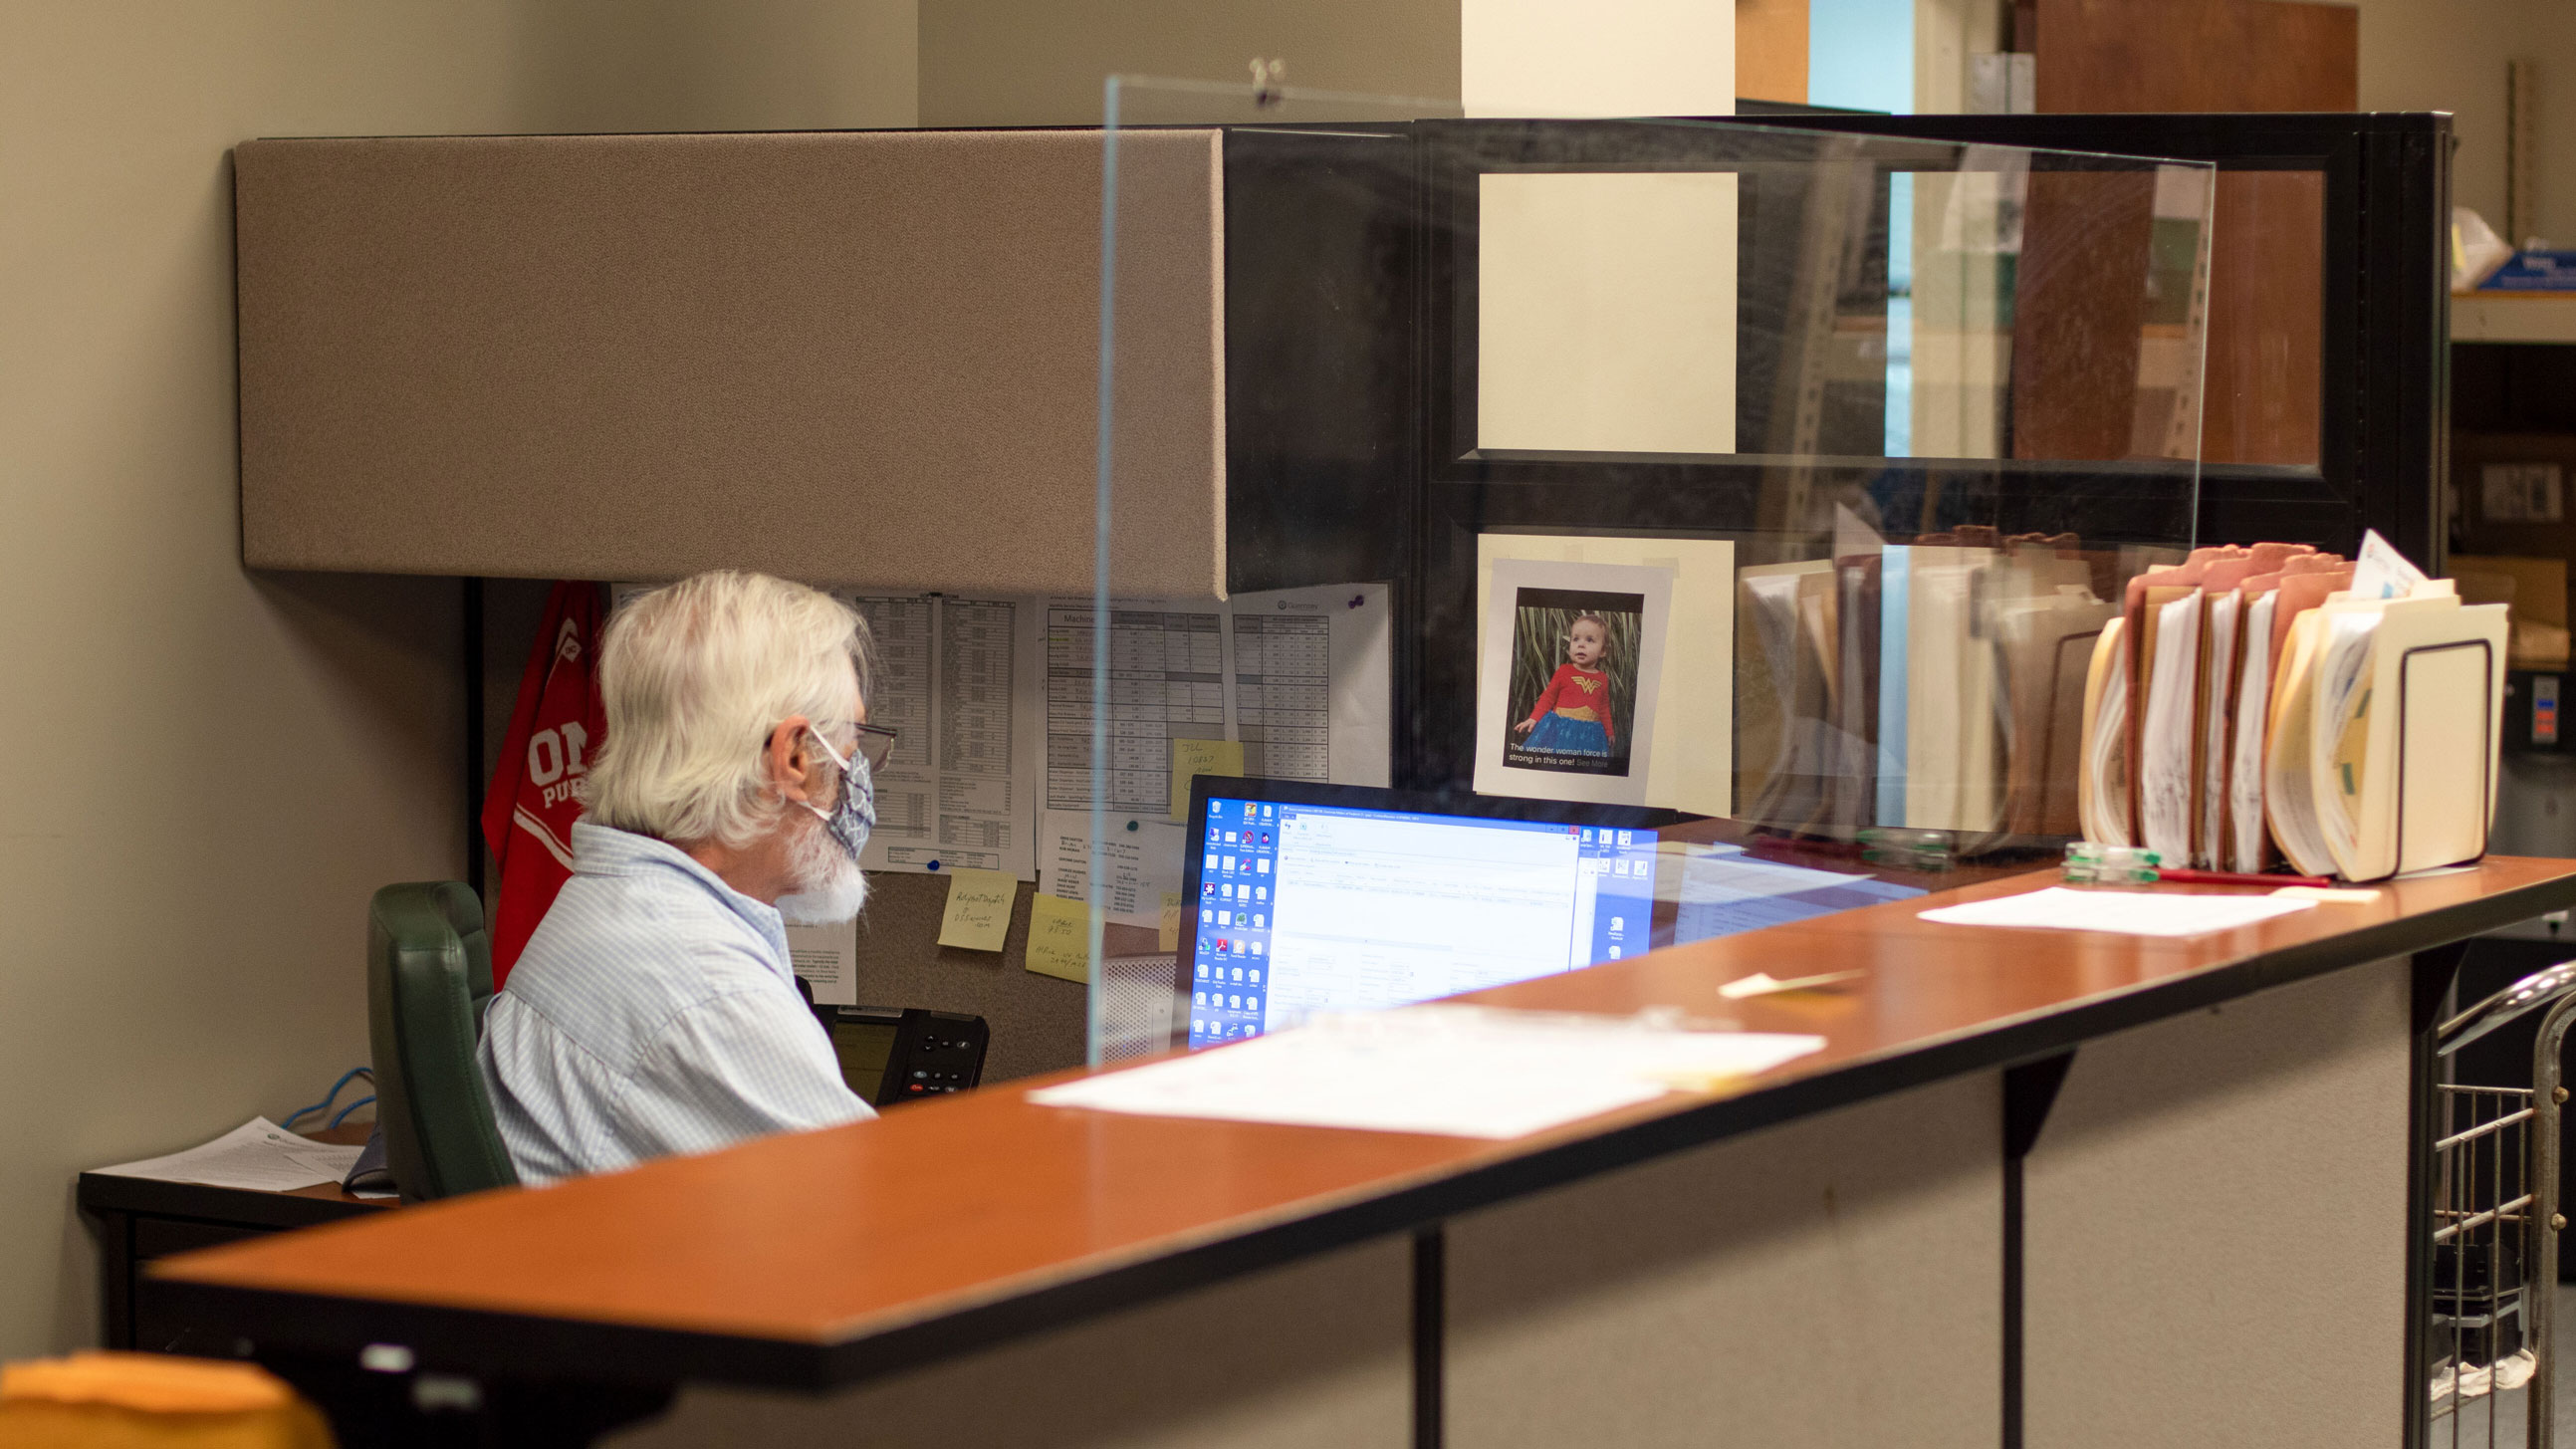 Older man sitting at a desk with a barrier around it